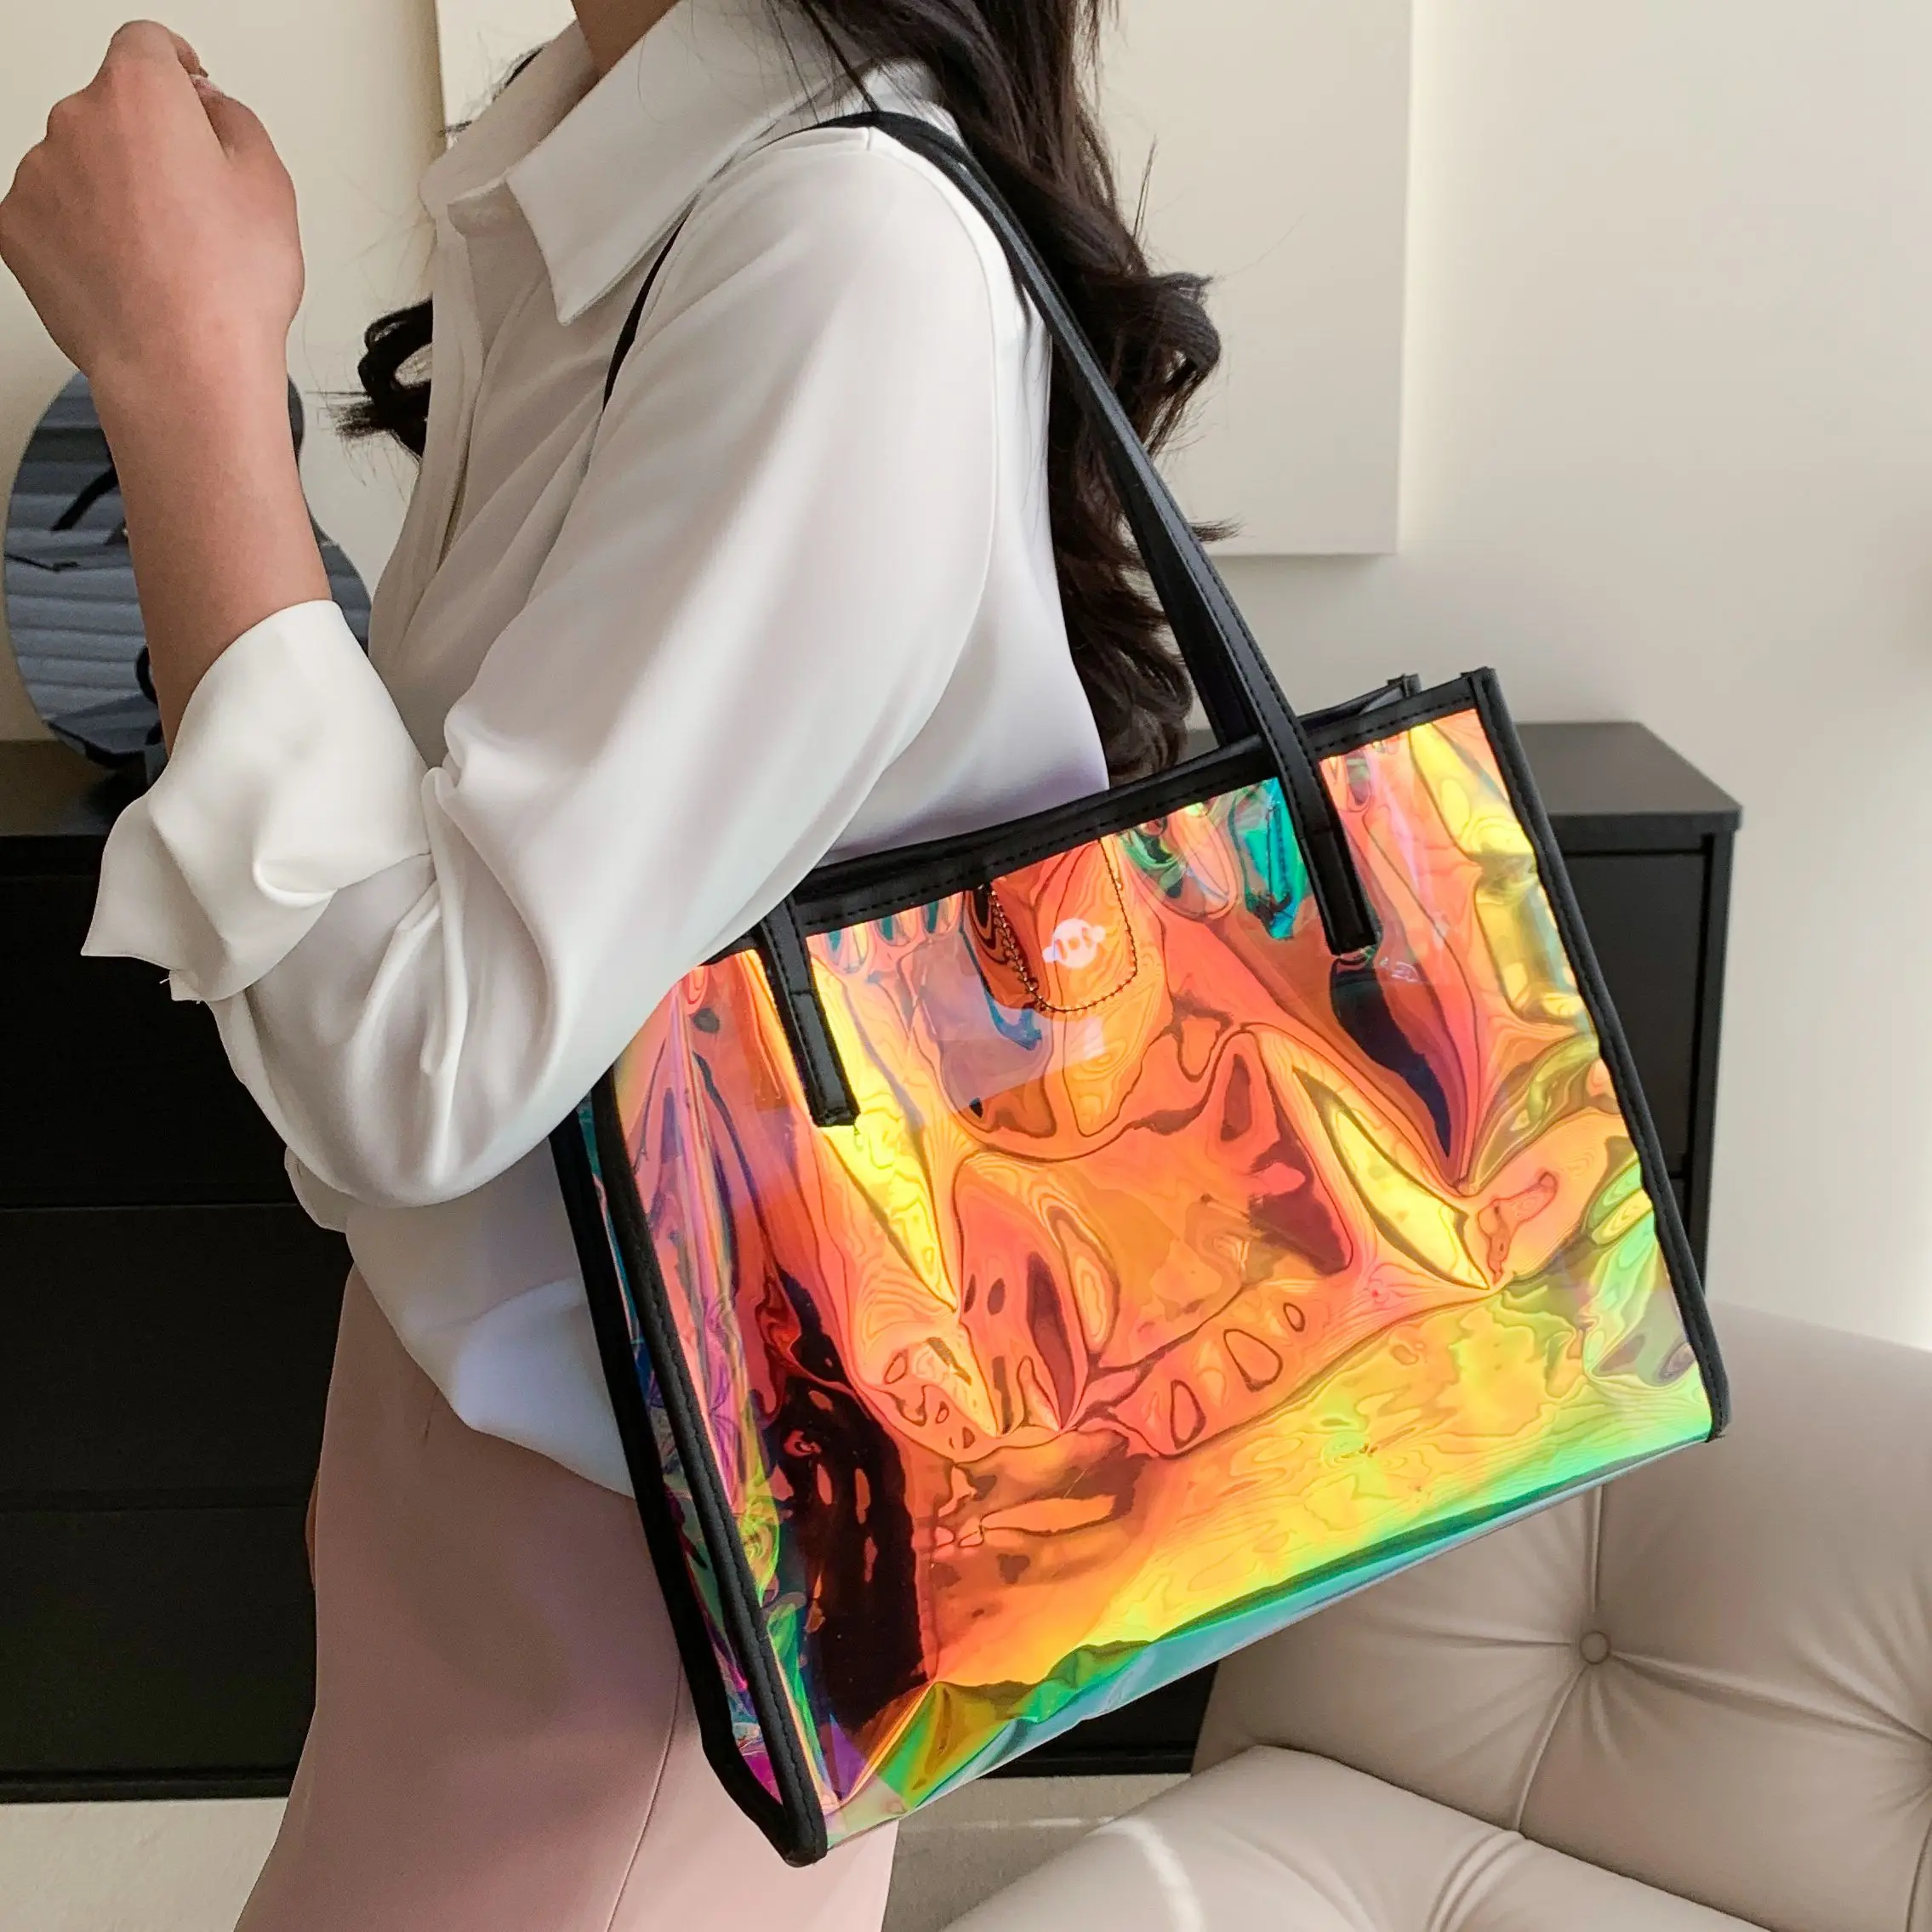 Fashion Lady Transparent Shoulder Bags for Women Clear Bag 2020 Summer Beach  Bag Big Totes Lady Travel Handbags Large-capacity - AliExpress